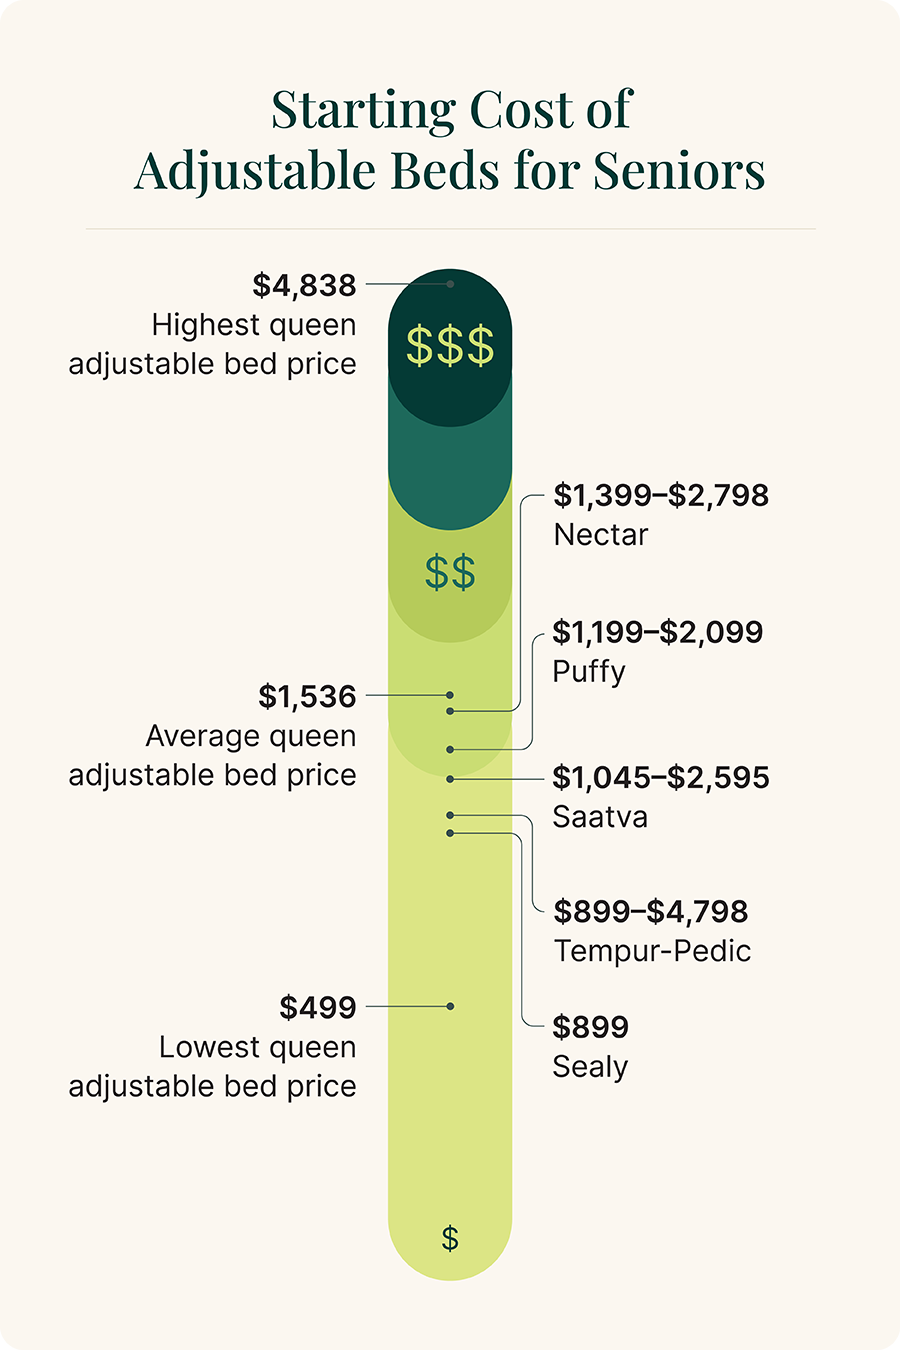 Best adjustable beds for seniors cost comparison graphic